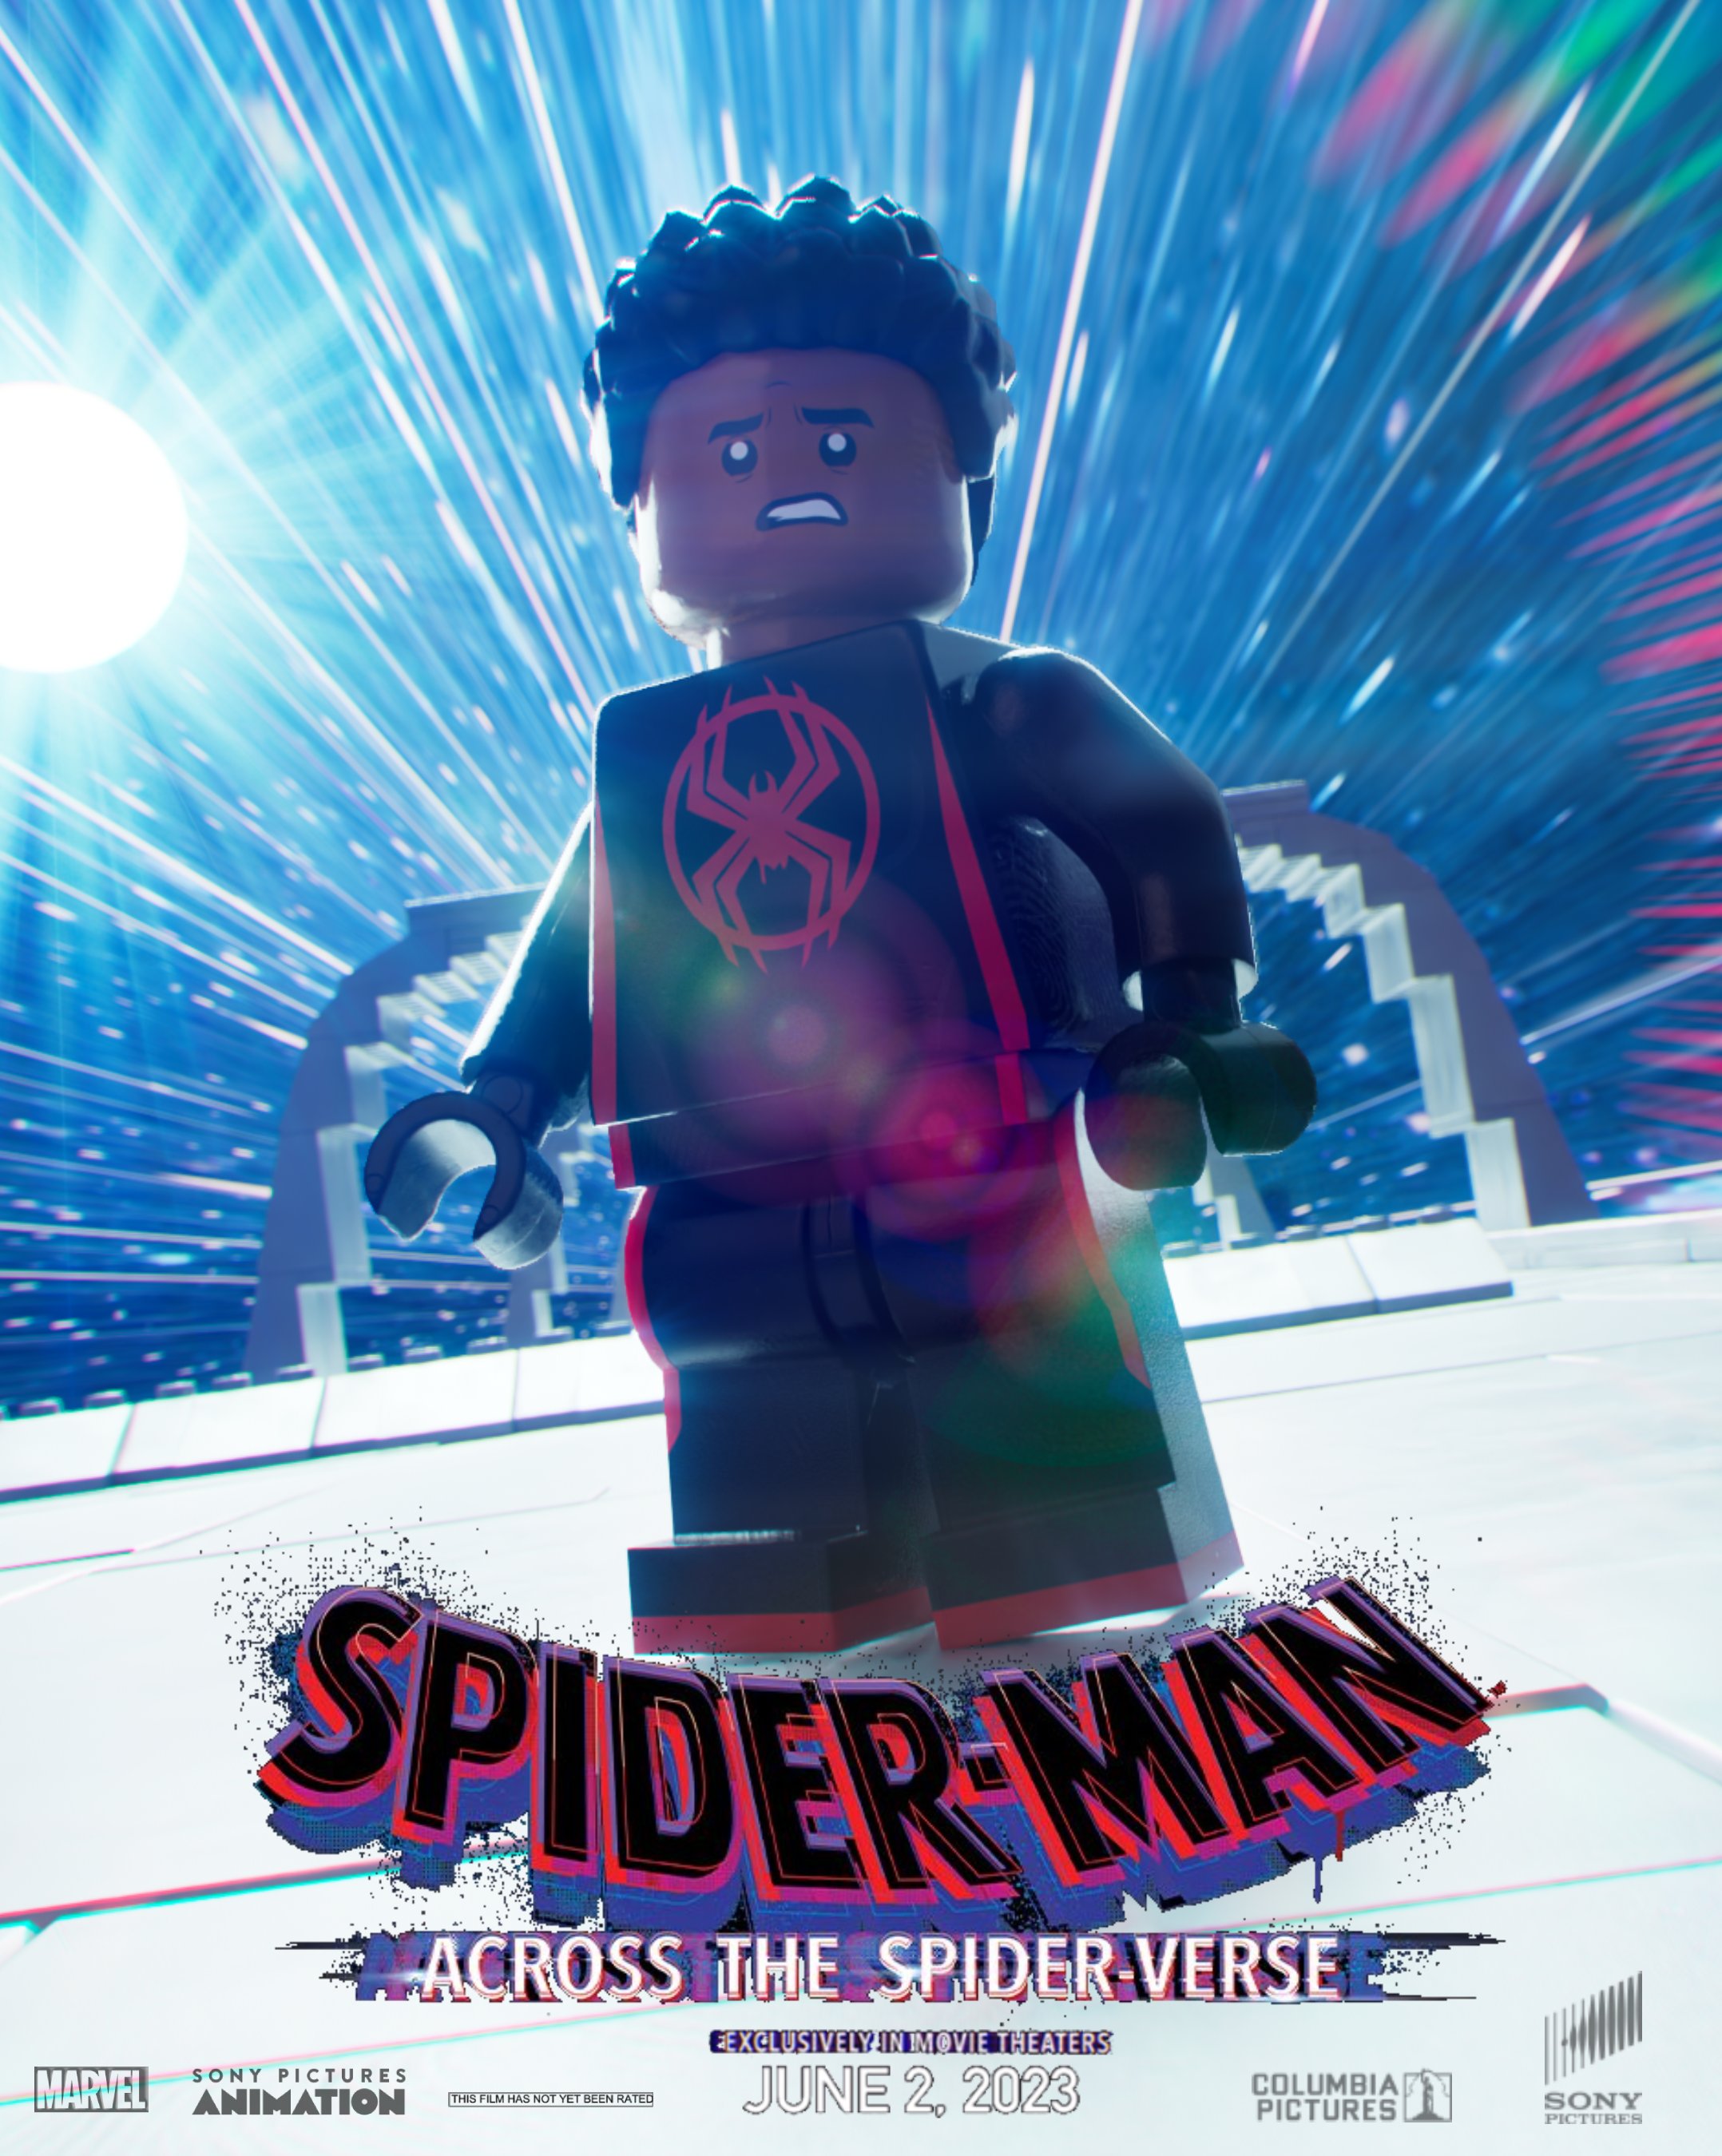 LegoMe_TheOG on Twitter: "Lego Version of the new #AcrossTheSpiderVerse #LEGO @SpiderVerse @SonyAnimation https://t.co/VNawiUYZno" / Twitter